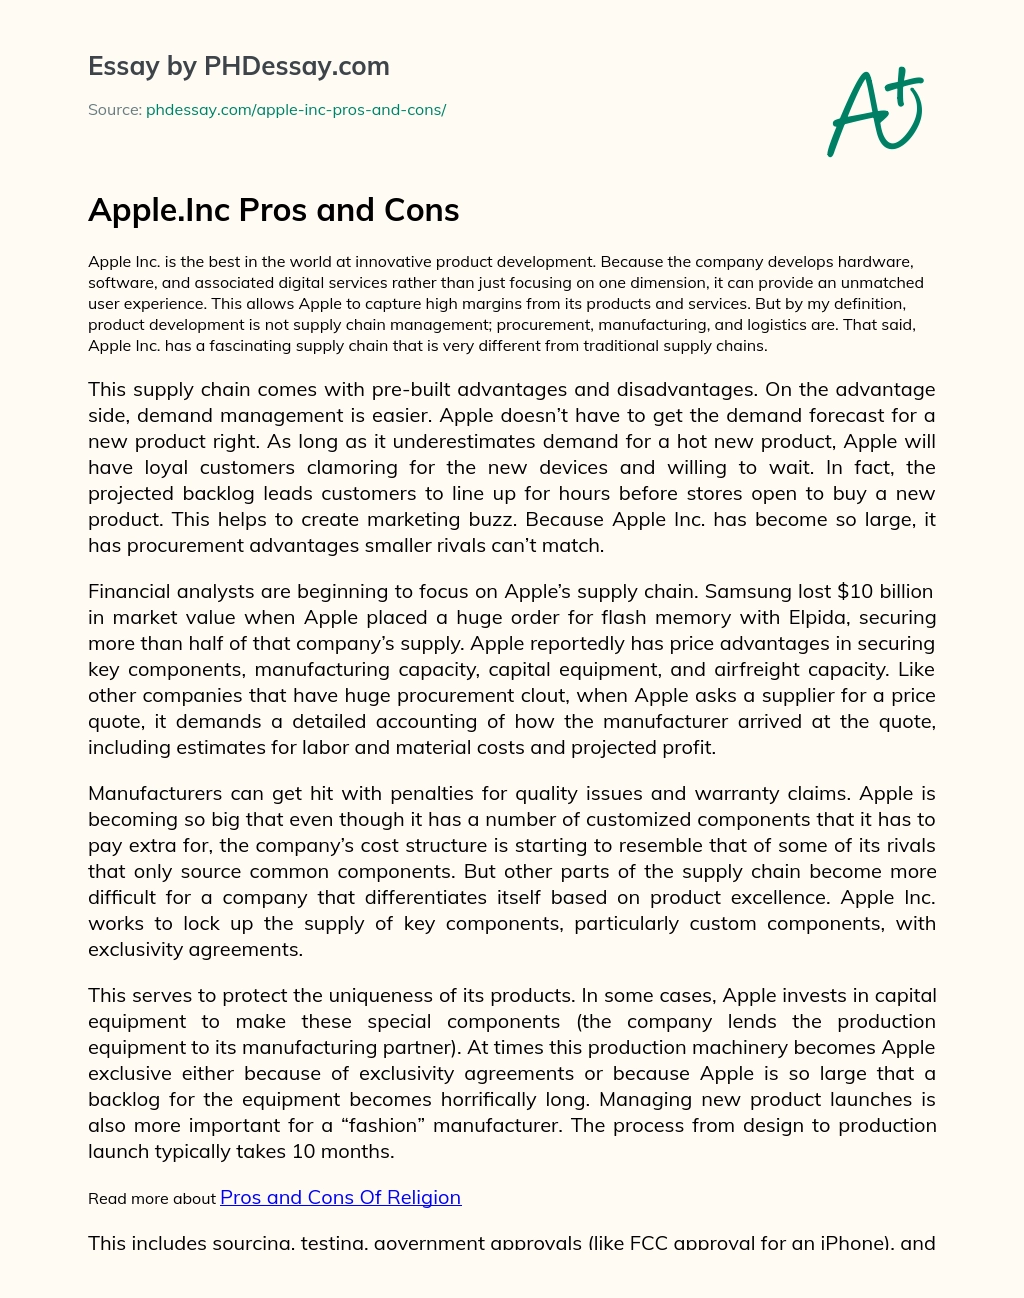 Apple.Inc Pros and Cons essay